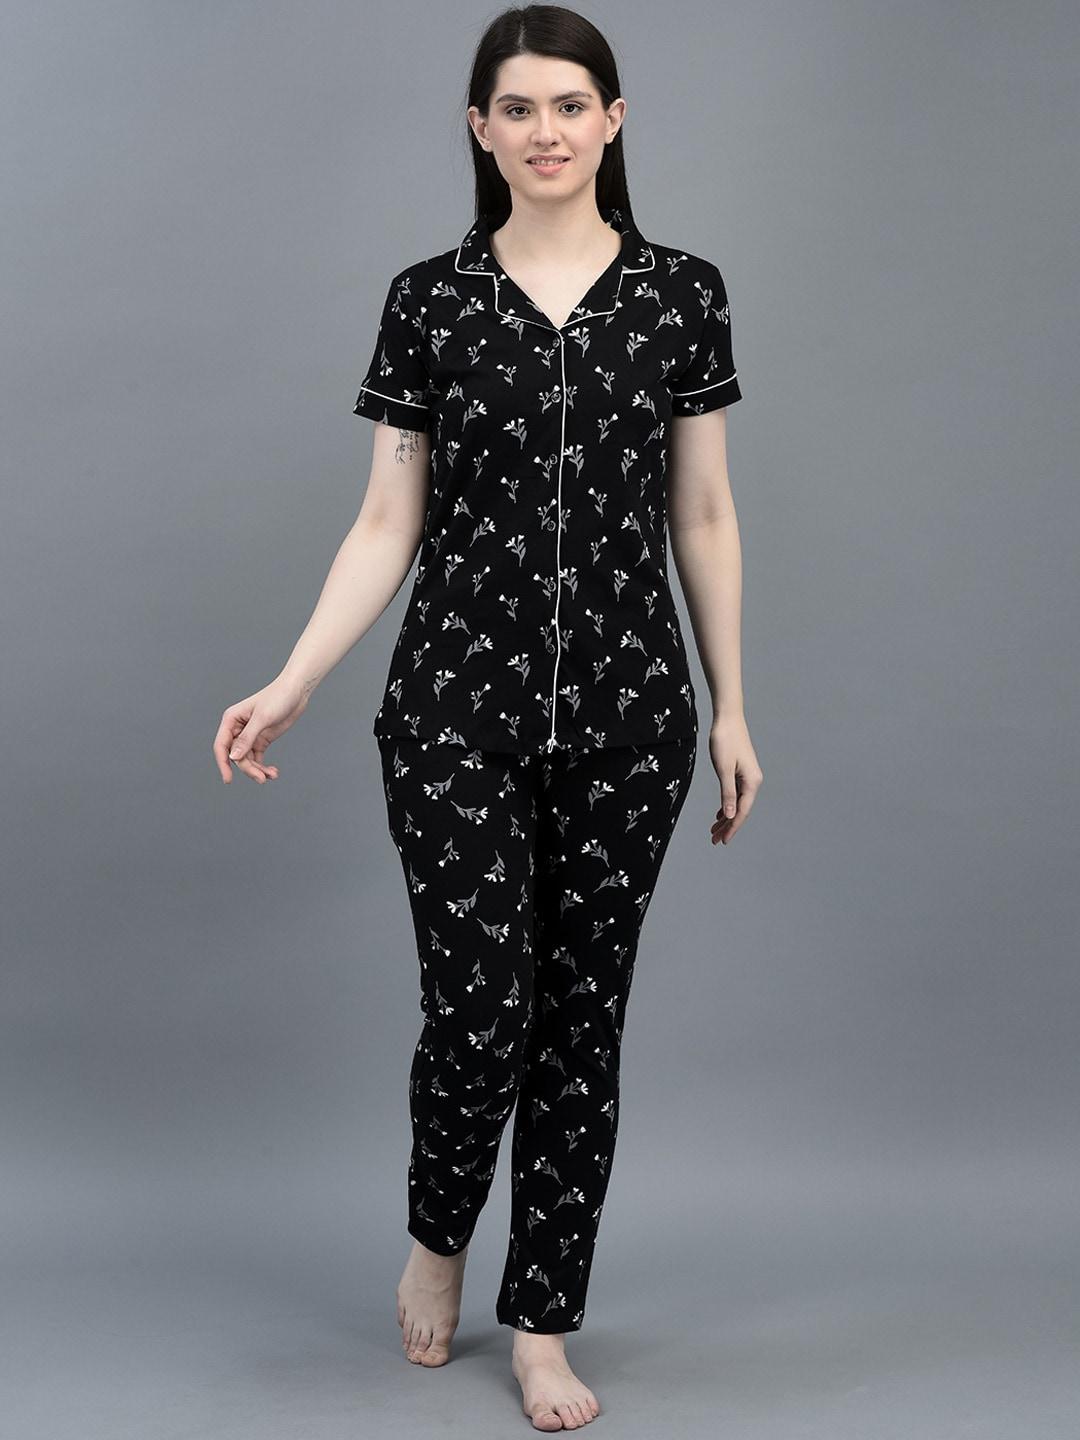 dollar-missy-floral-printed-pure-cotton-night-suit